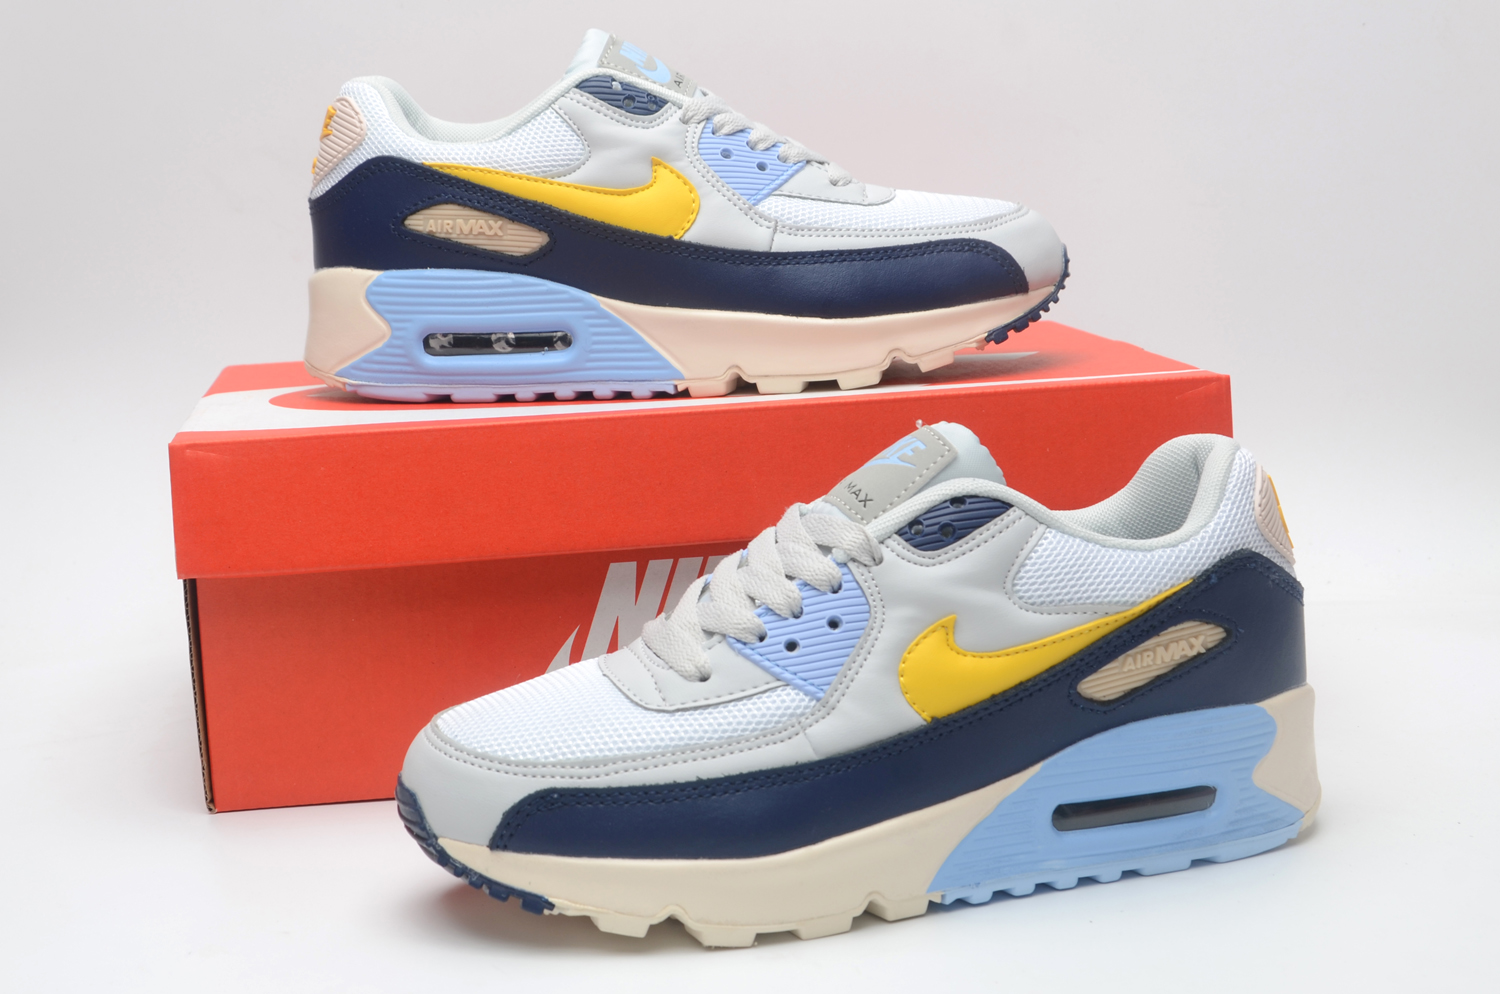 Women's Running weapon Air Max 90 Shoes 033